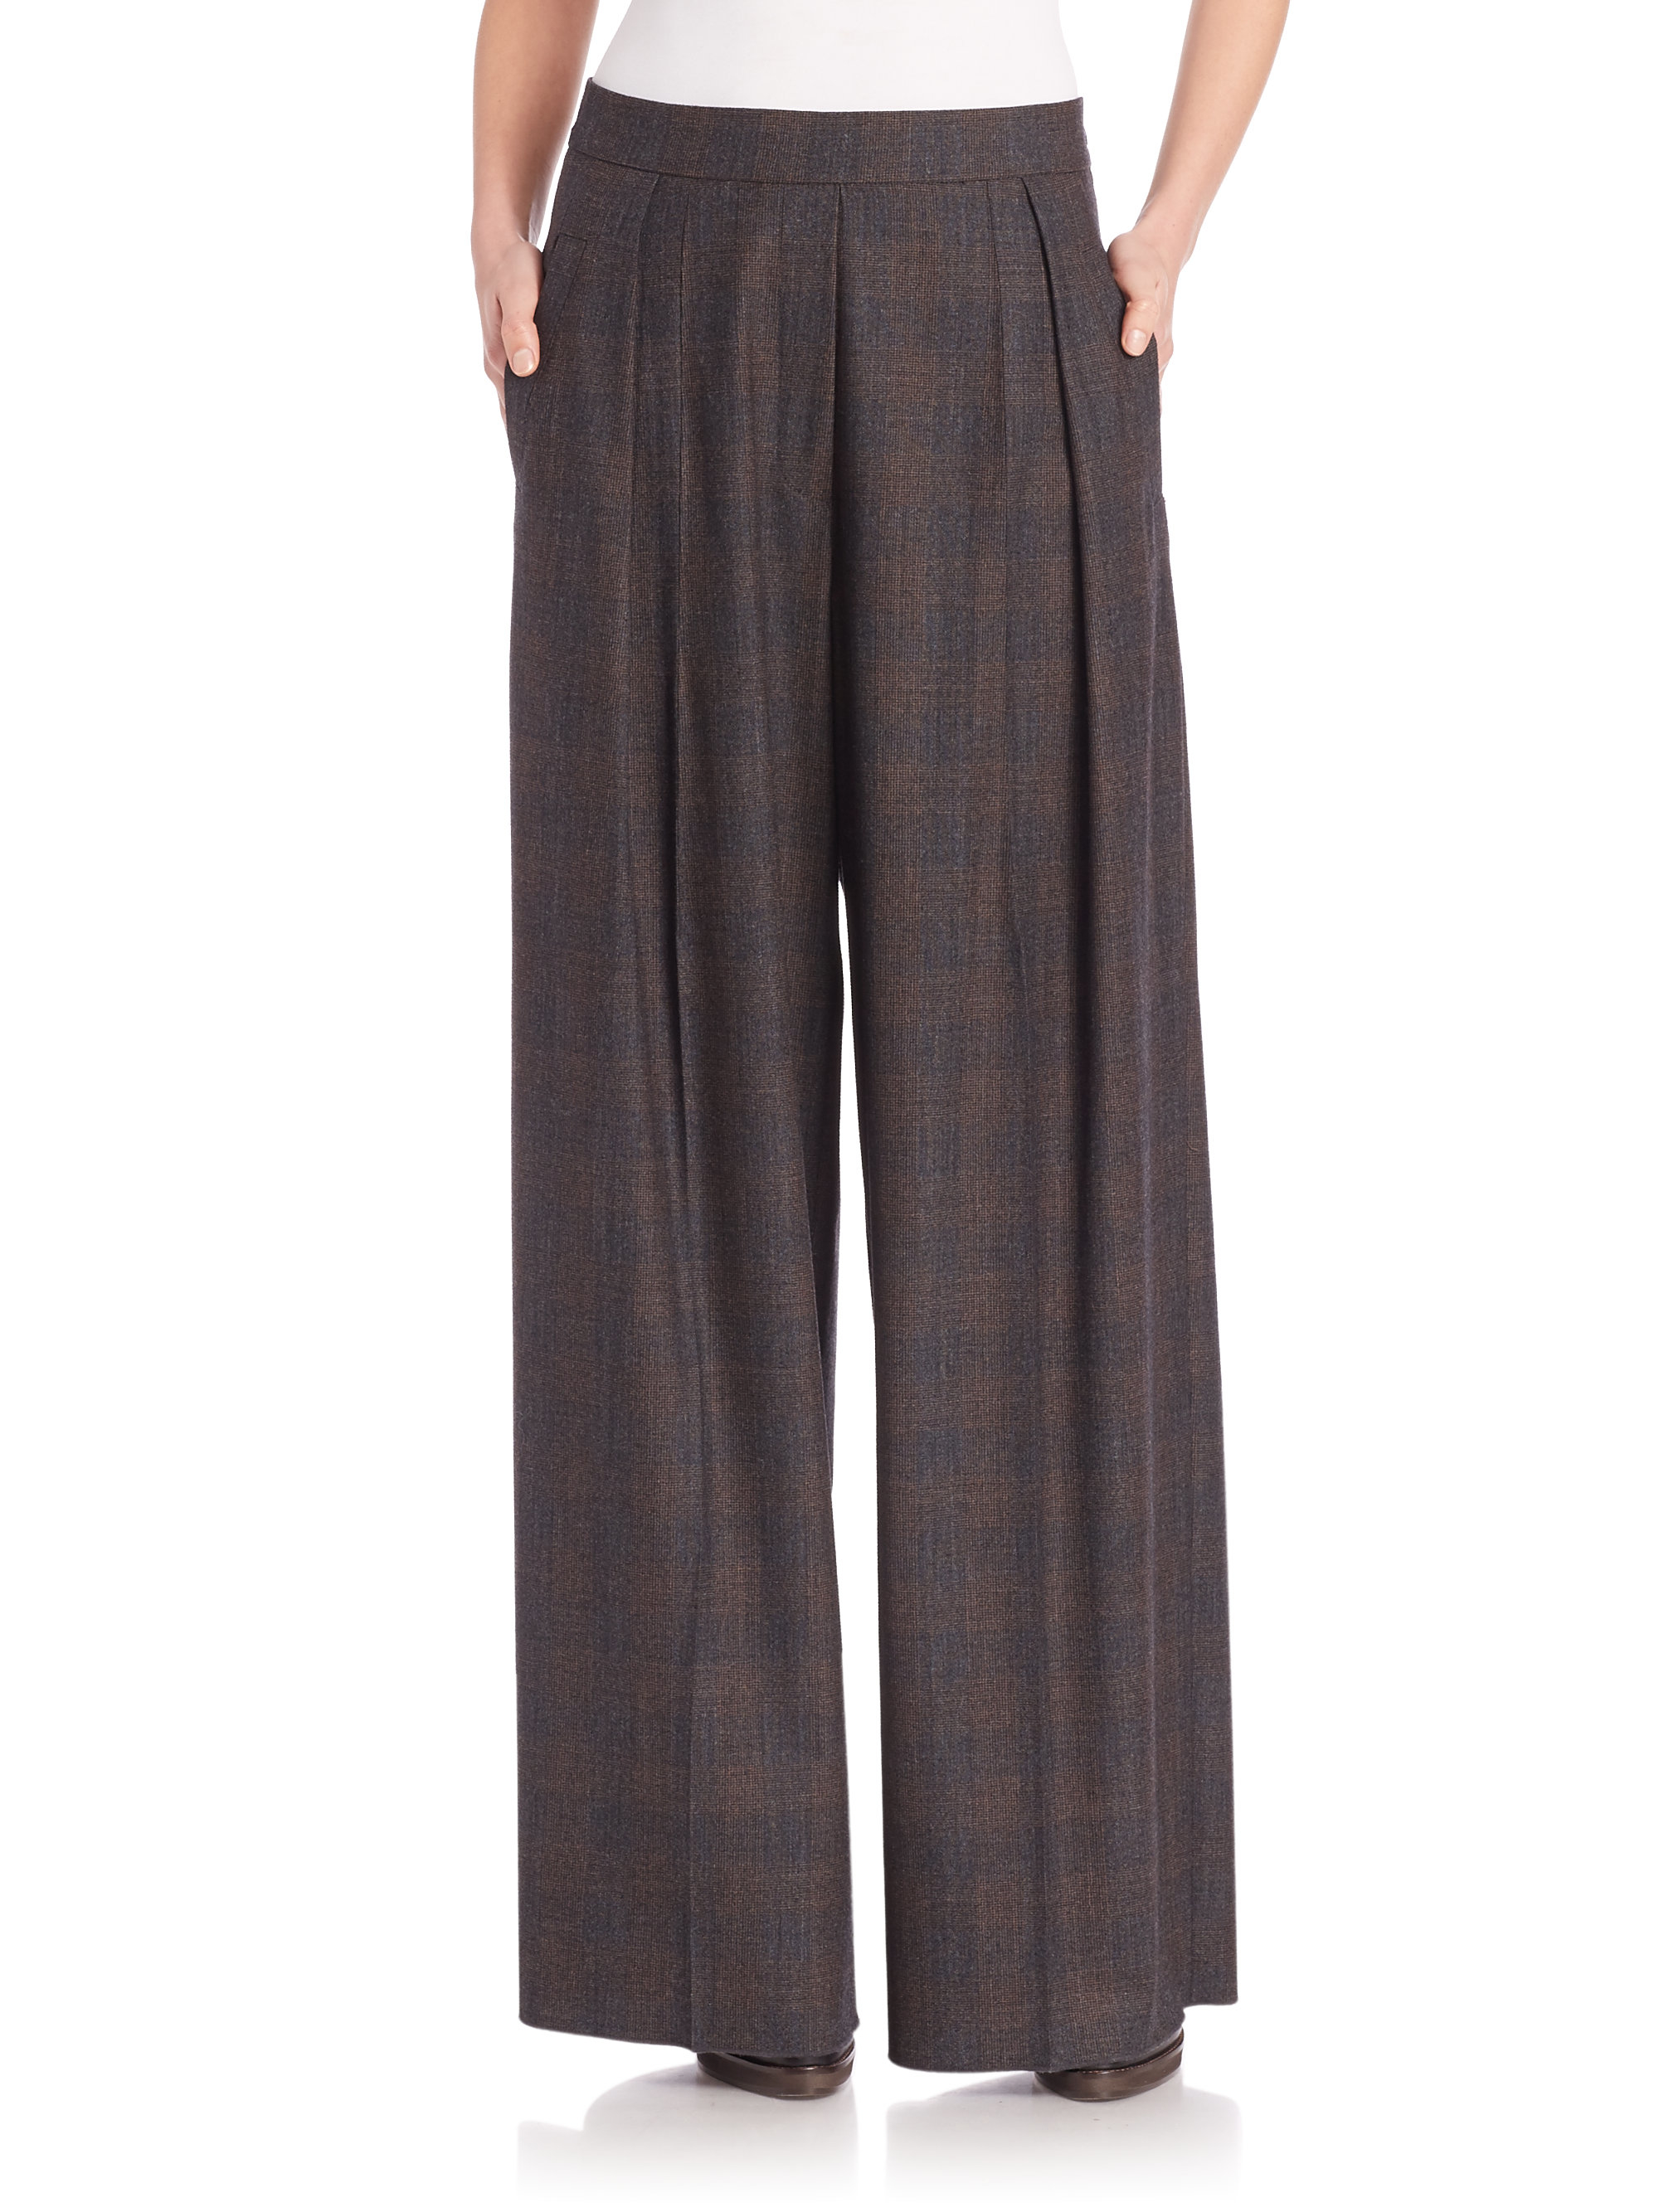 Lyst - Brunello cucinelli Wool Plaid Palazzo Pants in Gray